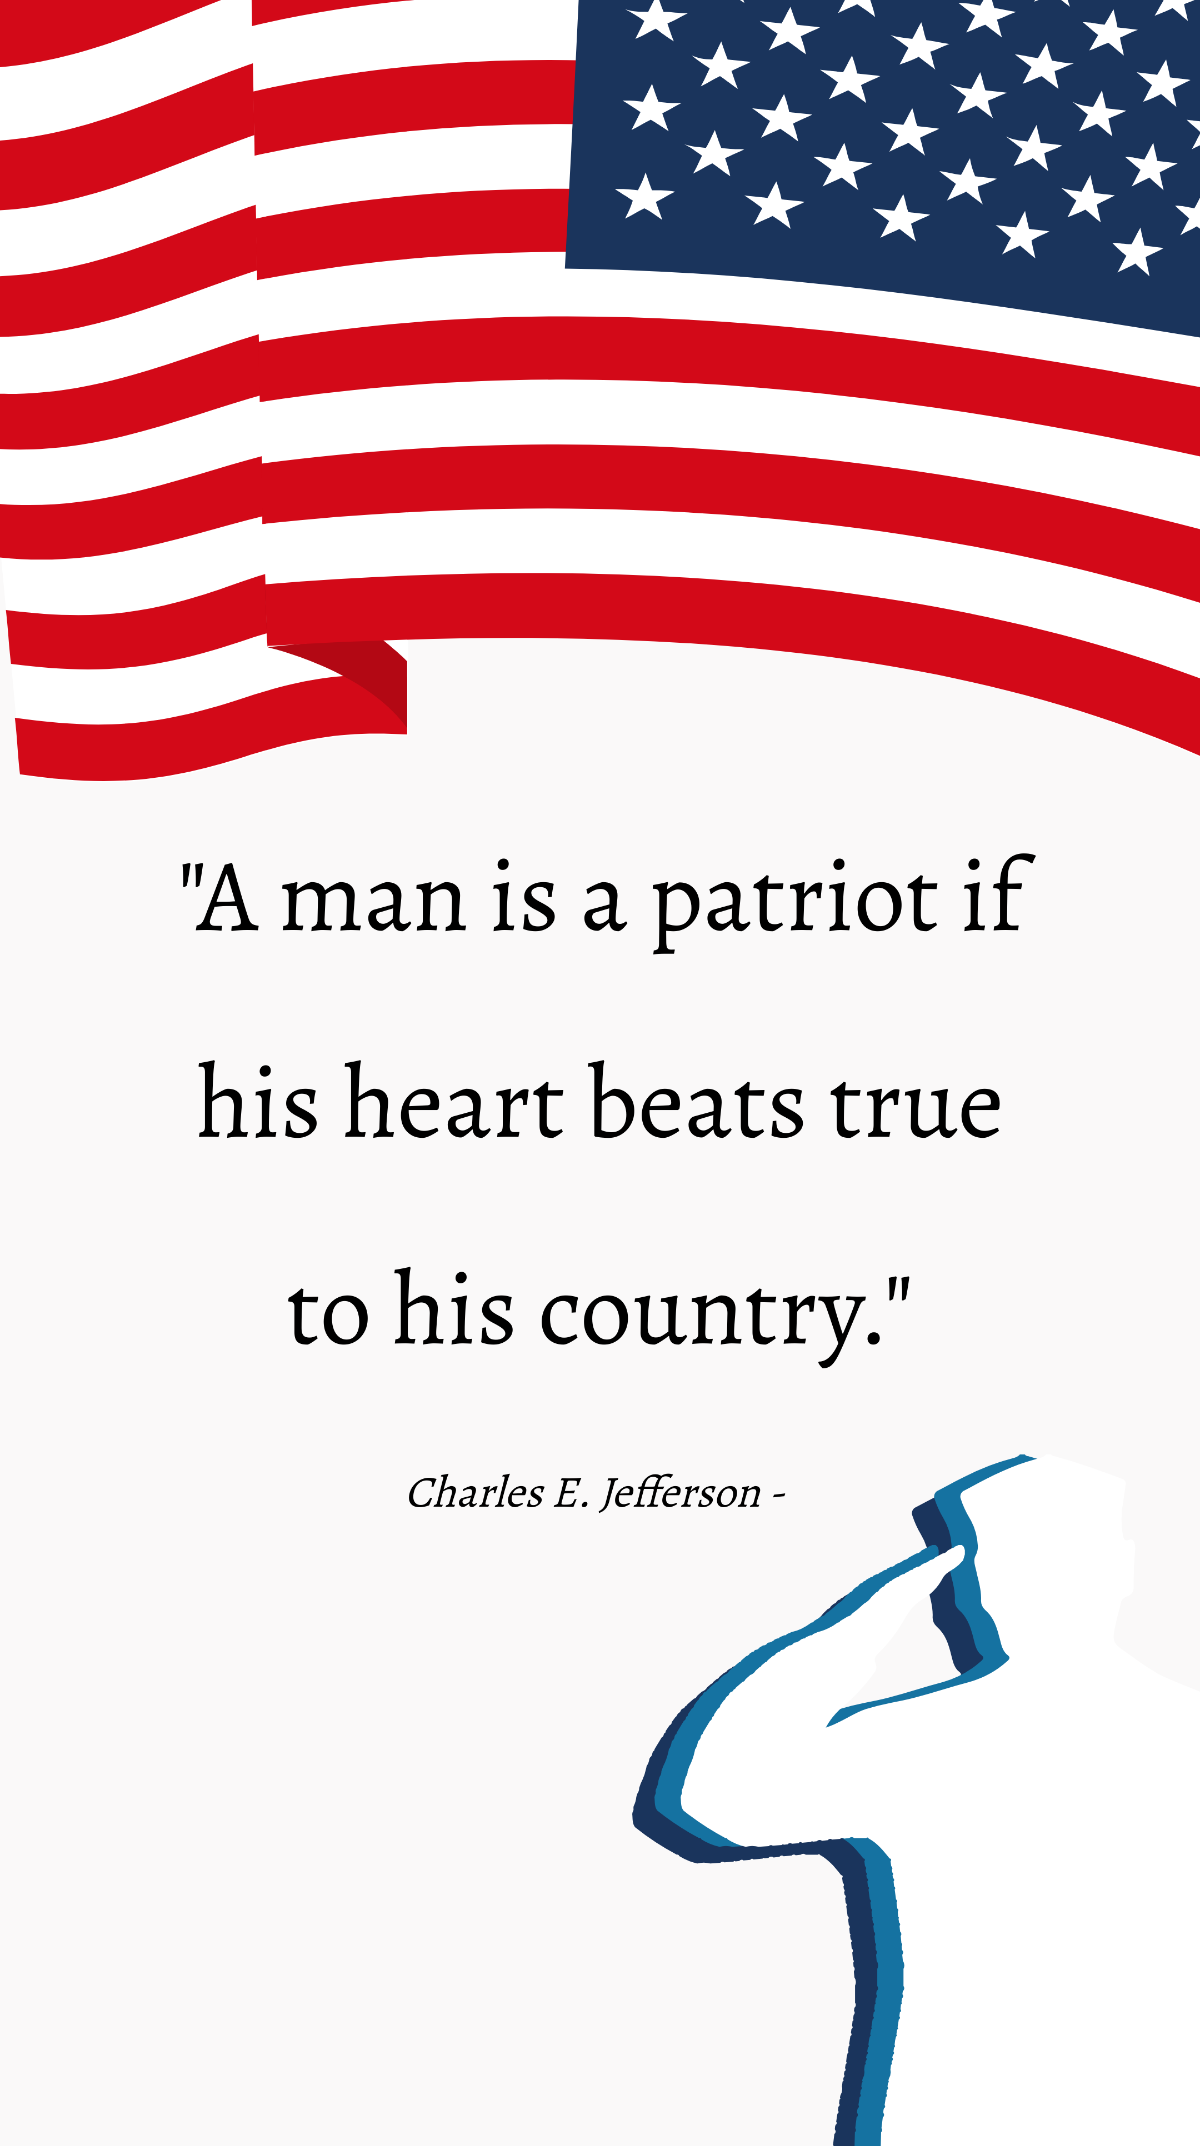 Charles E. Jefferson - A man is a patriot if his heart beats true to his country. Template